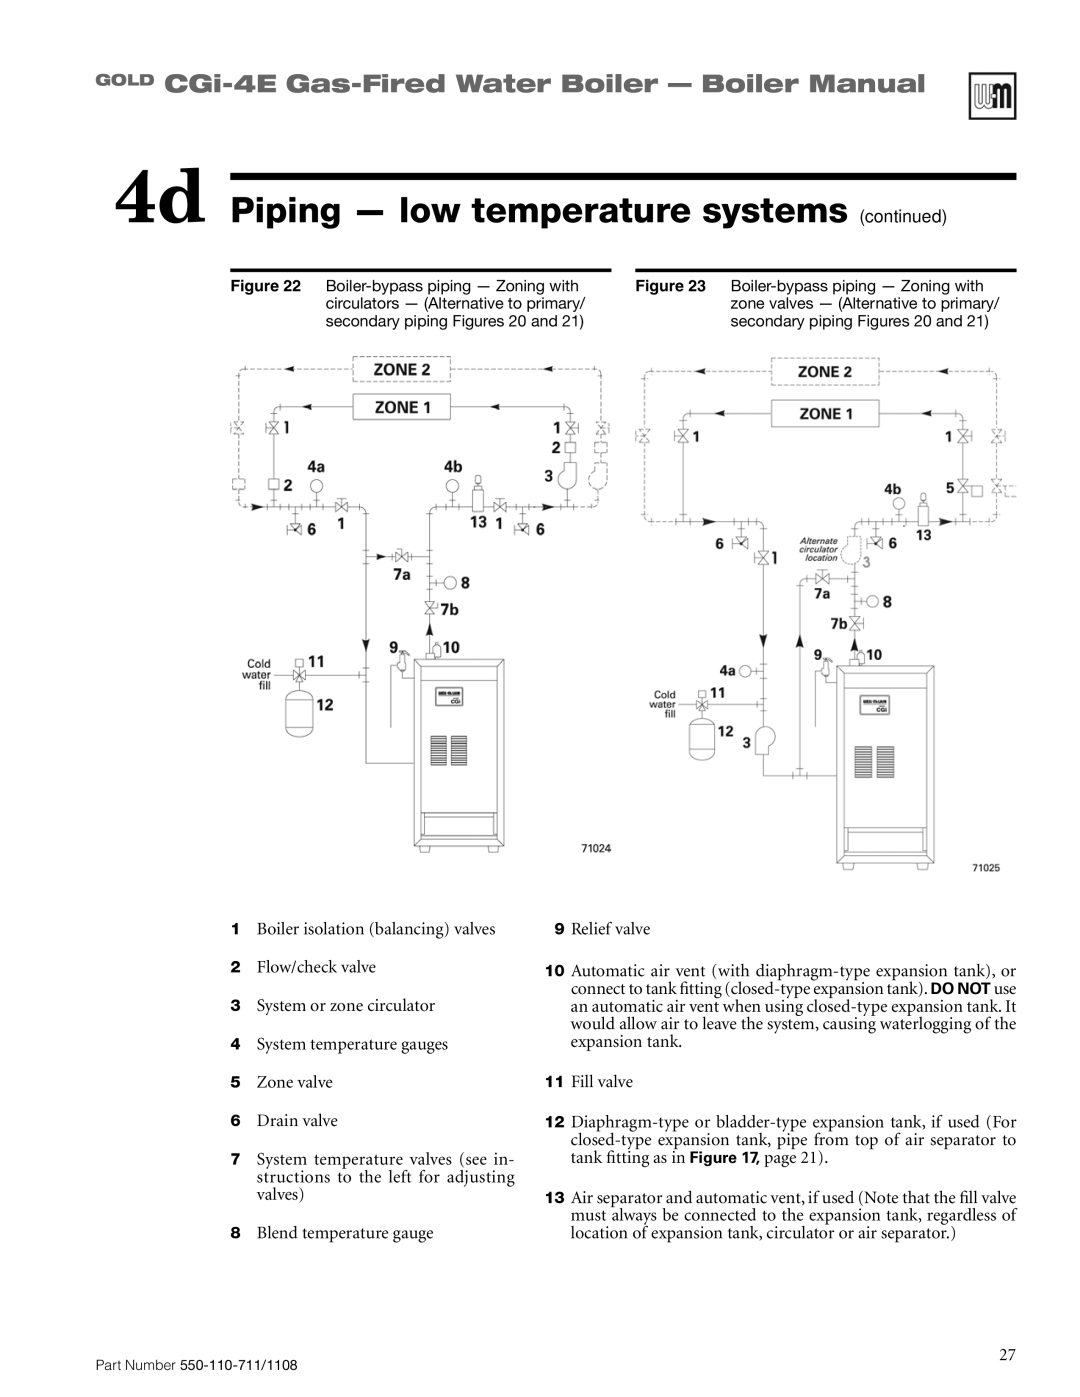 Weil-McLain CGI-4E manual 4d Piping - low temperature systems continued, GOLD CGi-4E Gas-FiredWater Boiler - Boiler Manual 